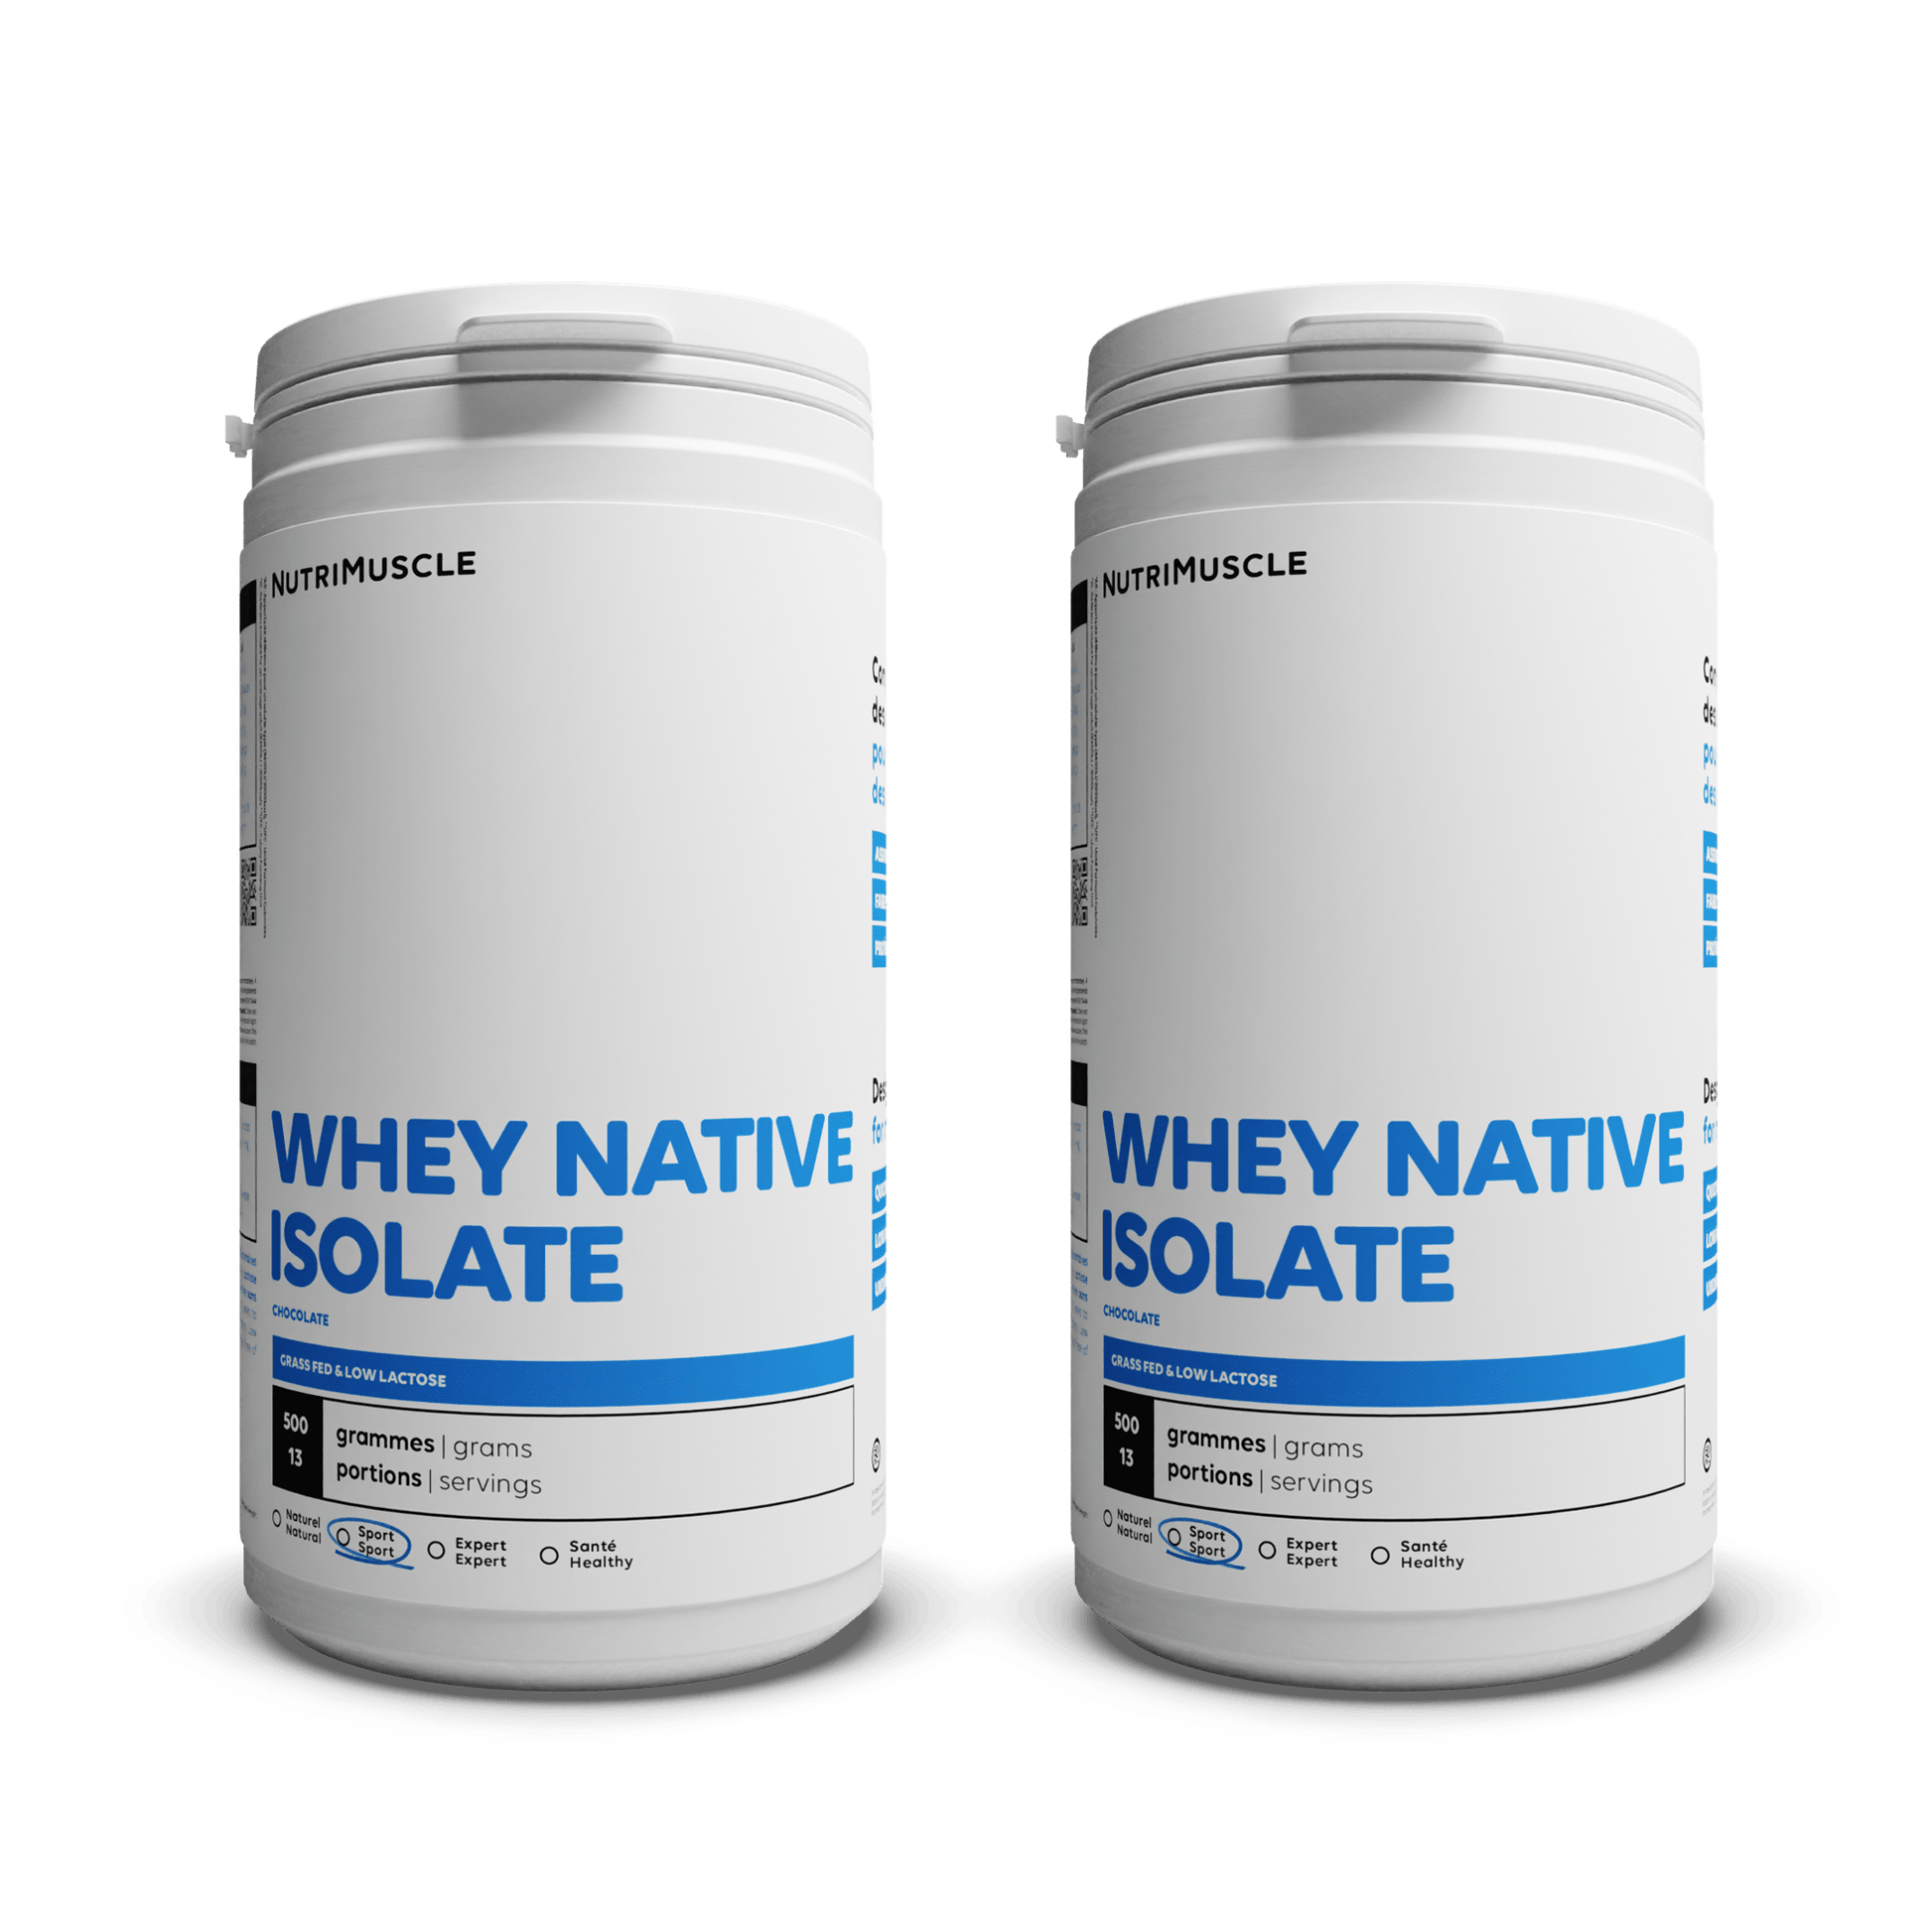 Nutrimuscle Protéines Chocolat / 1.00 kg Whey Native Isolate (Low lactose)